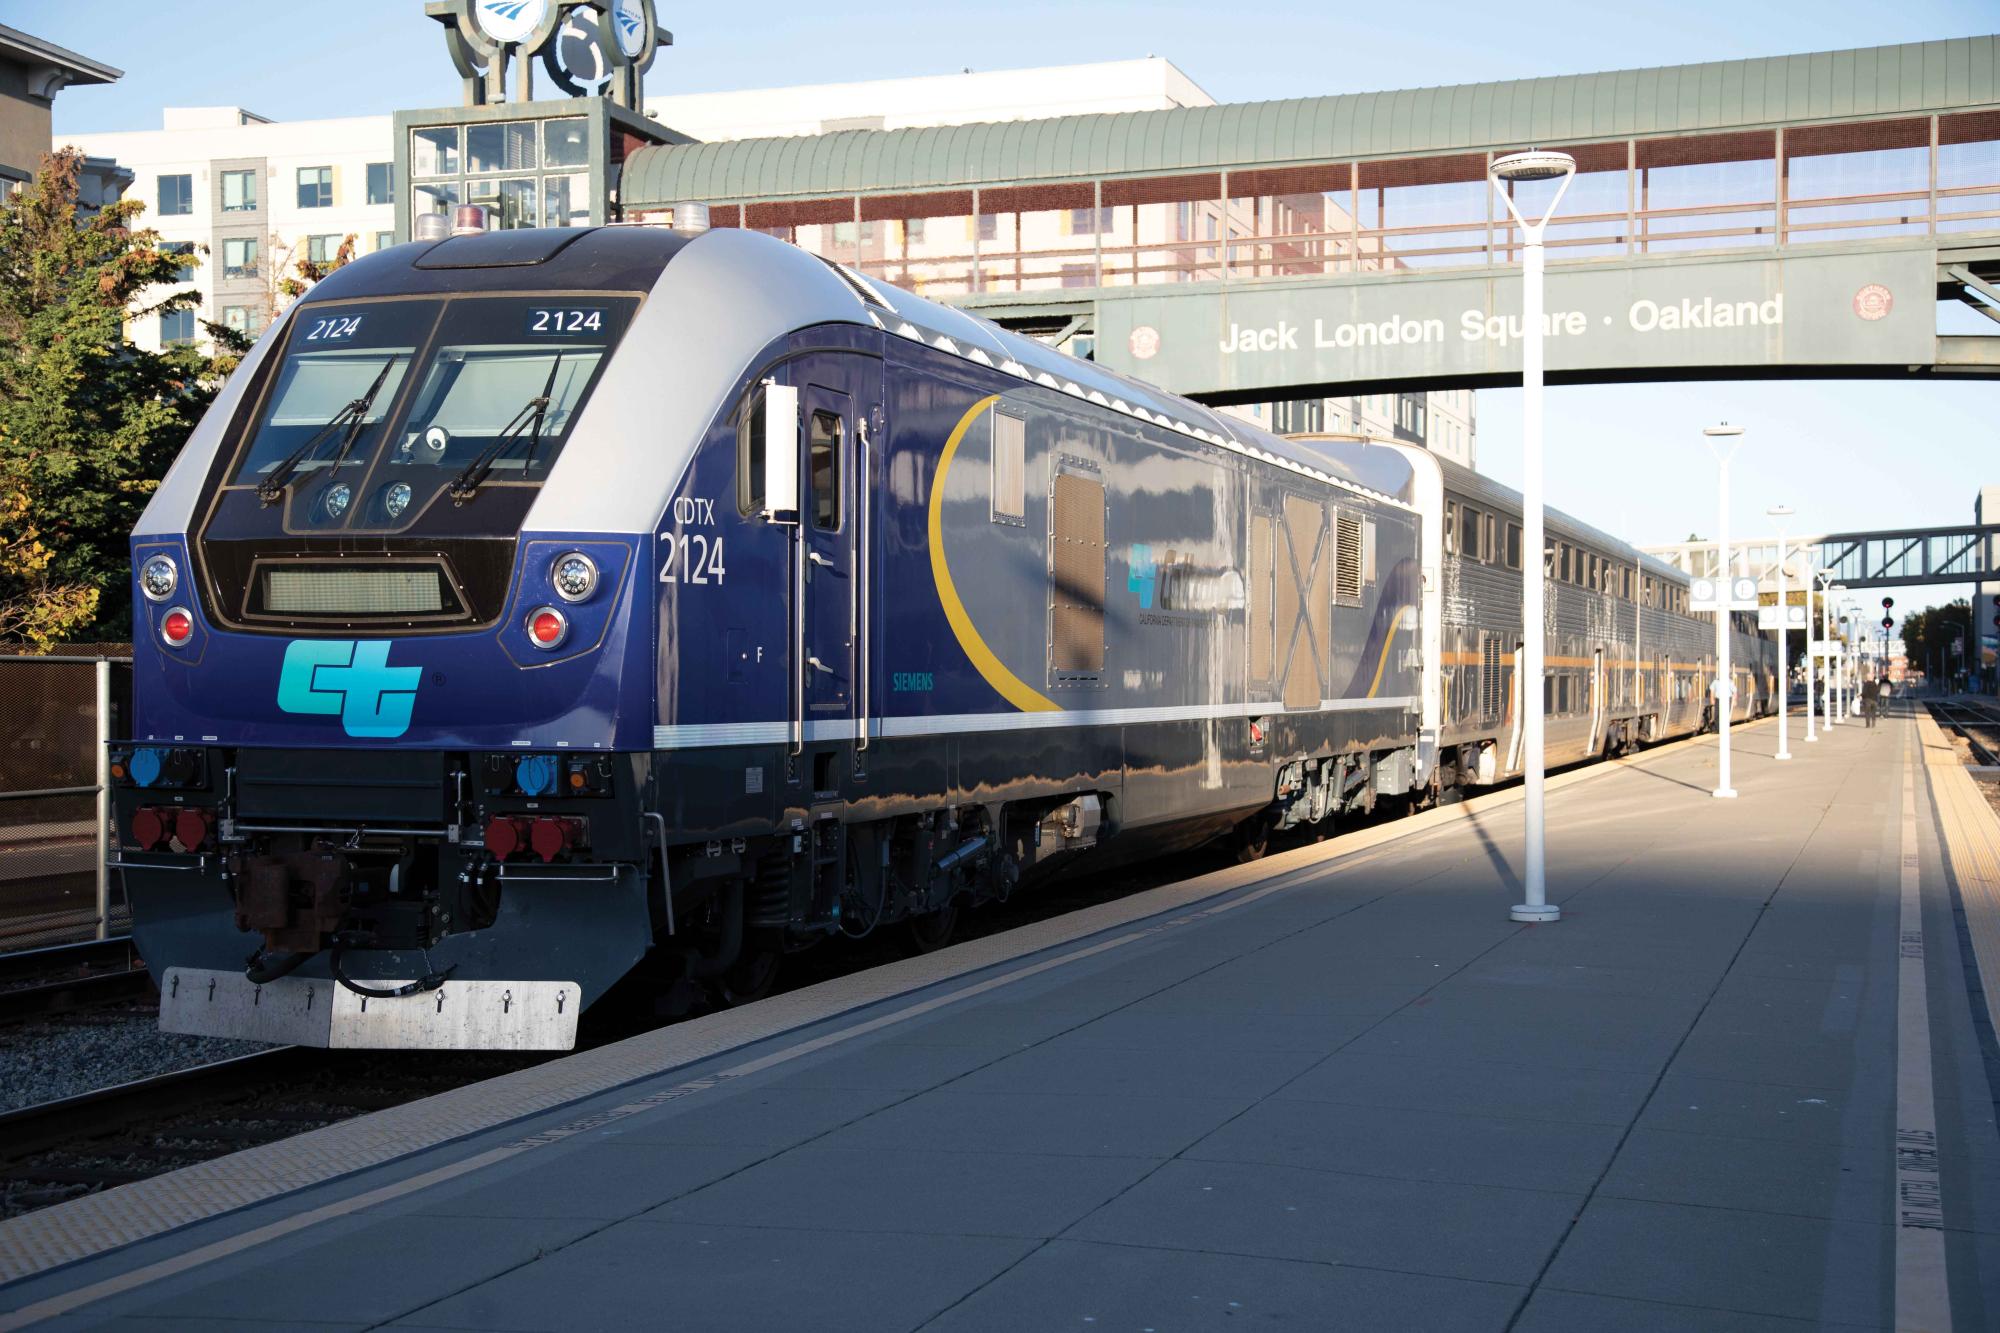 A Capitol Corridor train sits at the Jack London Square station in Oakland with a large shadow encompassing half the platform.